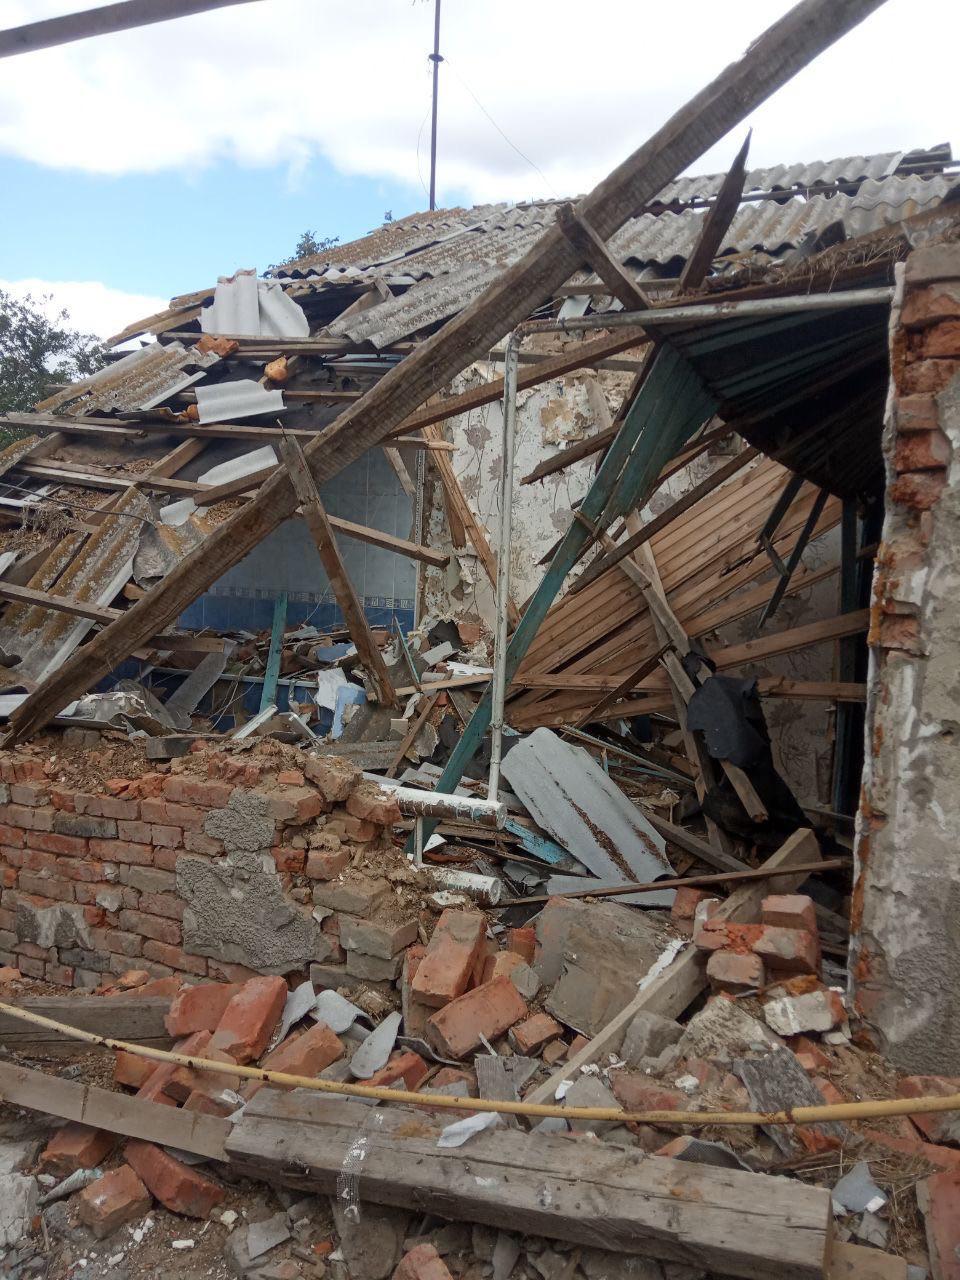 An image of a house that has been demolished.